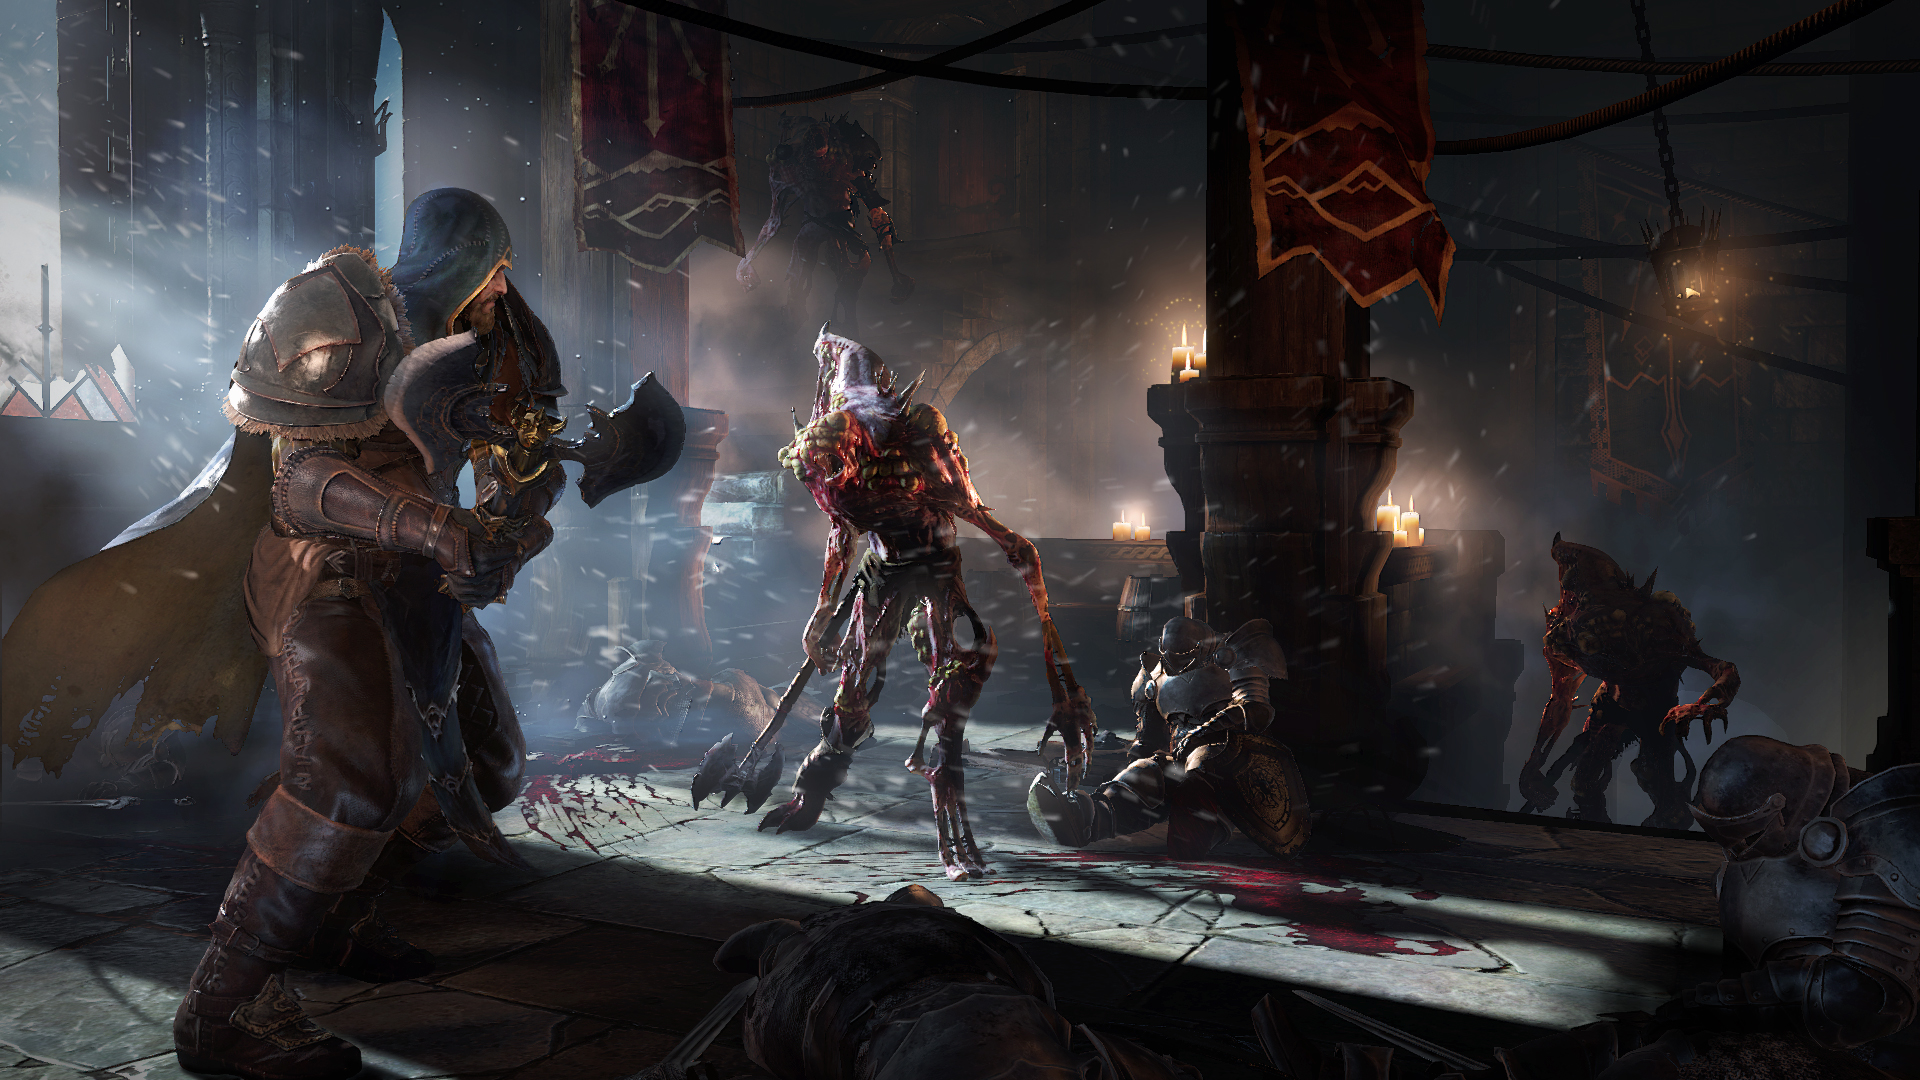 Lords of the Fallen (2014 video game) - Wikipedia